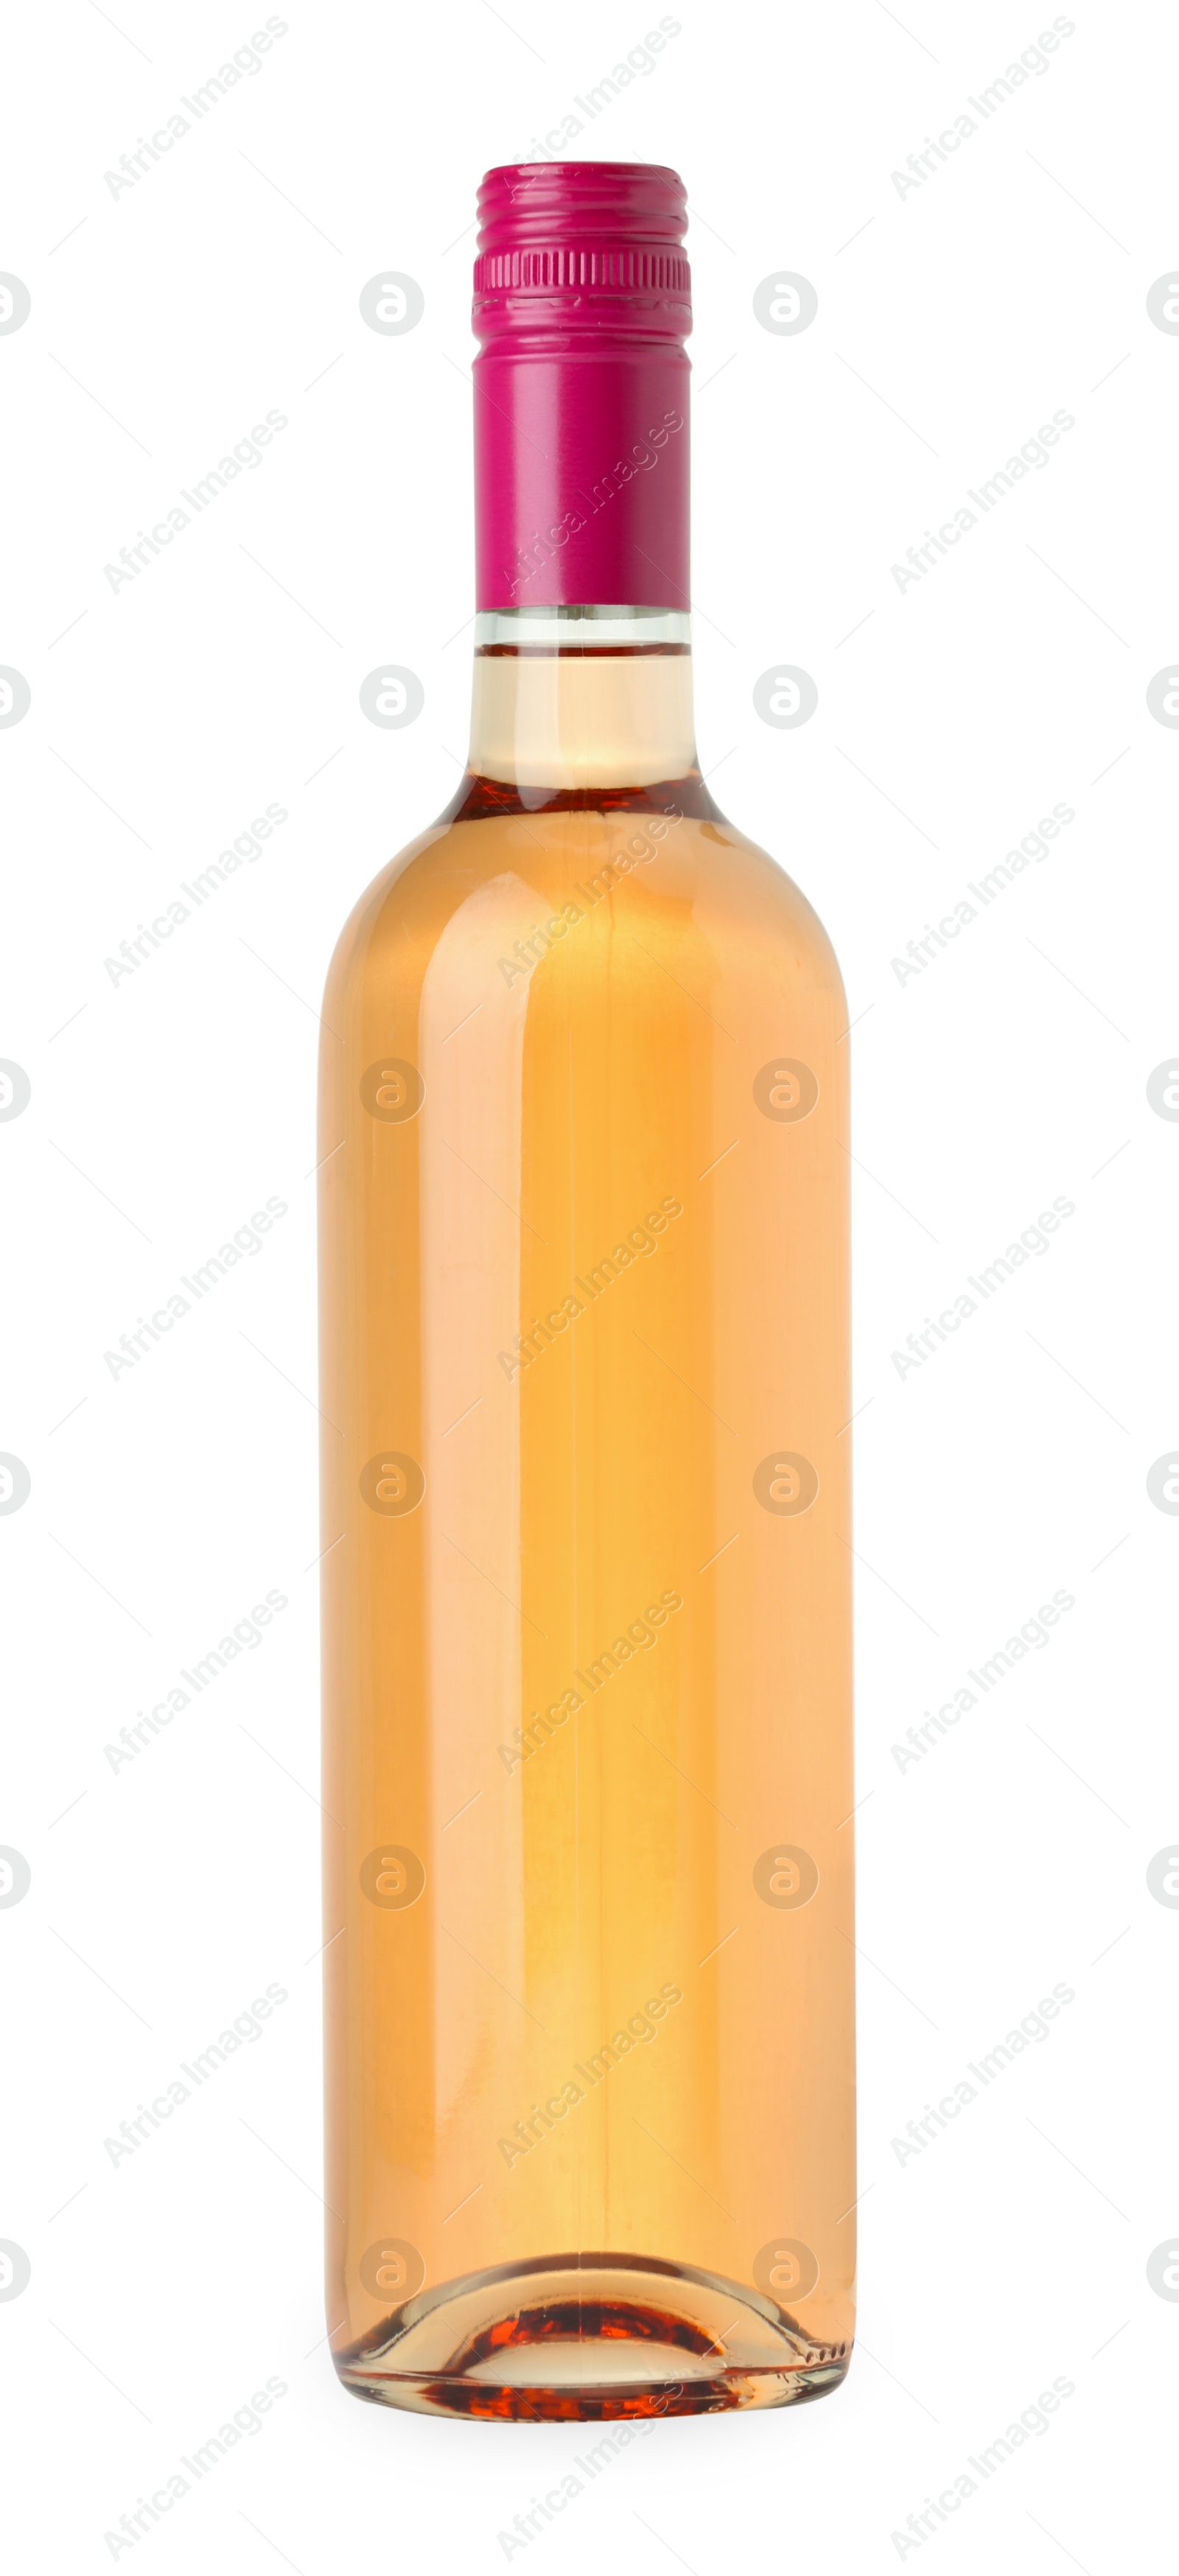 Photo of Bottle of expensive rose wine isolated on white